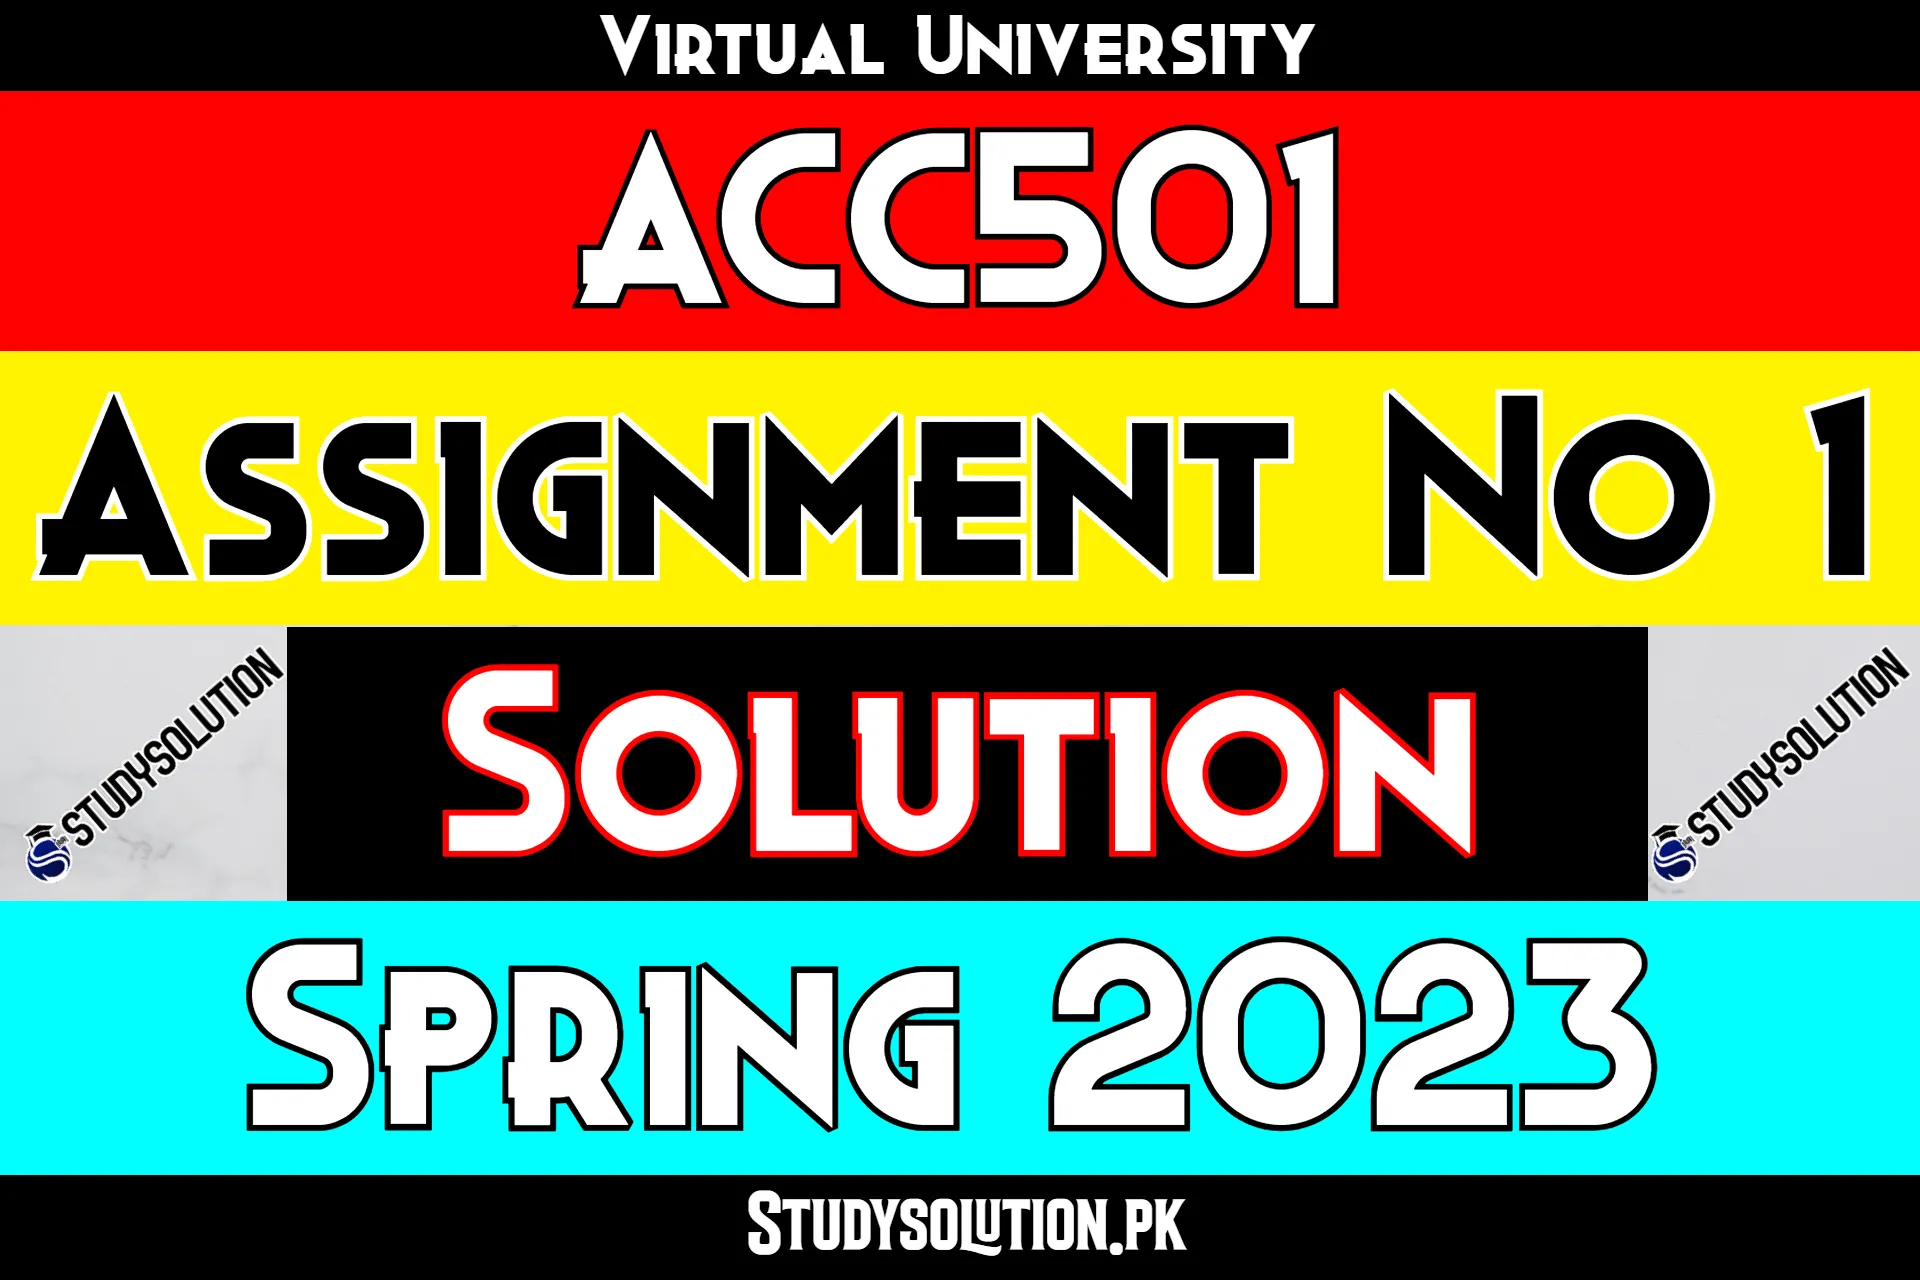 ACC501 Assignment No 1 Solution Spring 2023